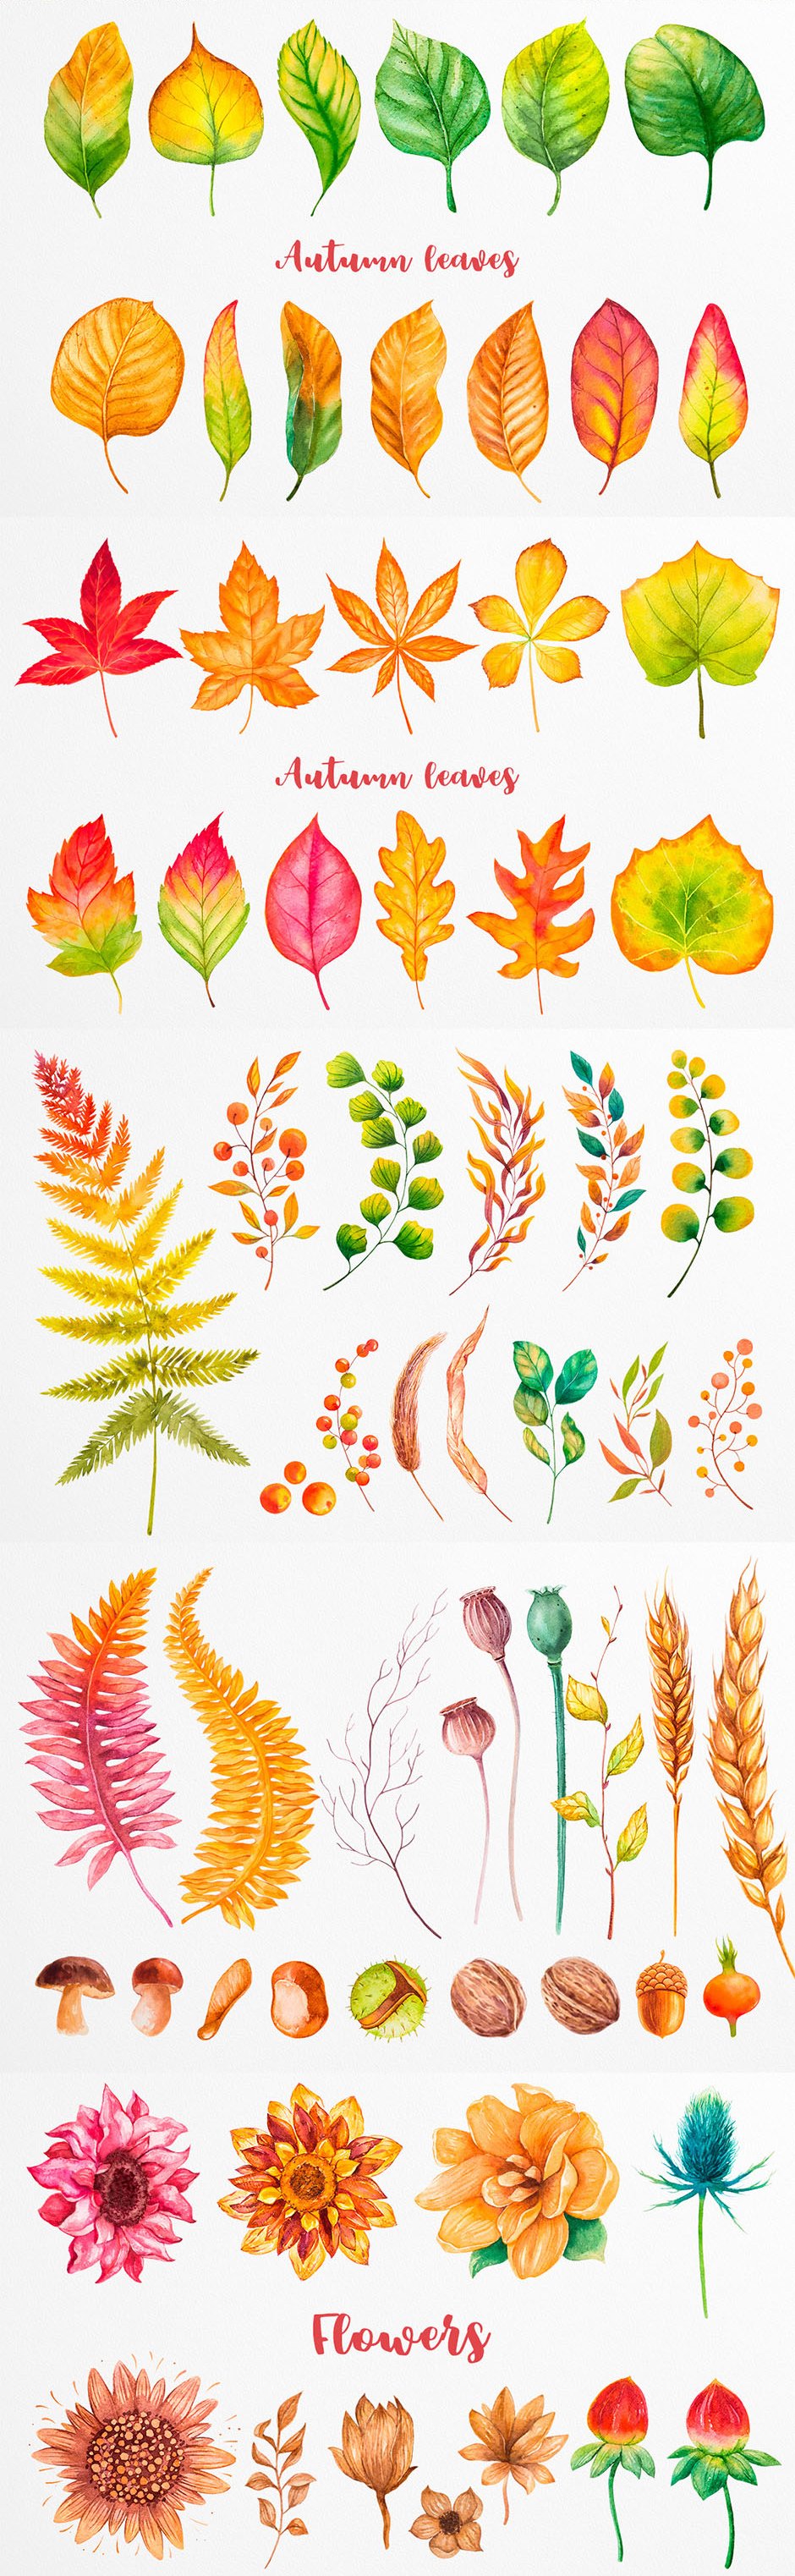 Fall Vectors Collection